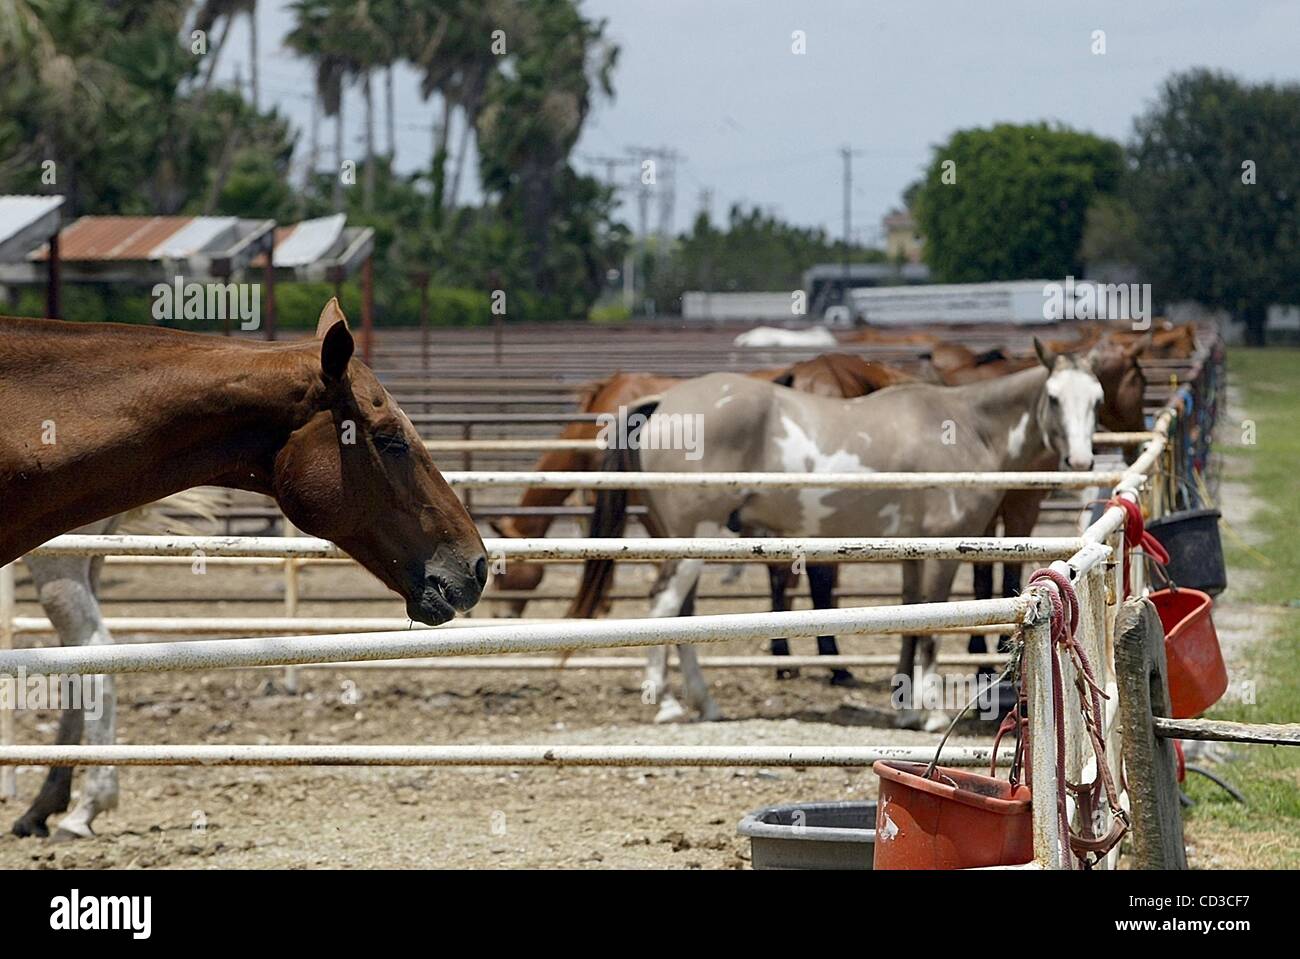 Apr 25, 2008 - Boca Raton, Florida, USA - The Royal Palm Polo & Sports Club closed its doors Monday and horse owners are to pick up their remaining ponies. The stadium has played host to fancy cotillion events. polo competitions and hosted an annual high-end car auction on its properties near Jog Rd Stock Photo